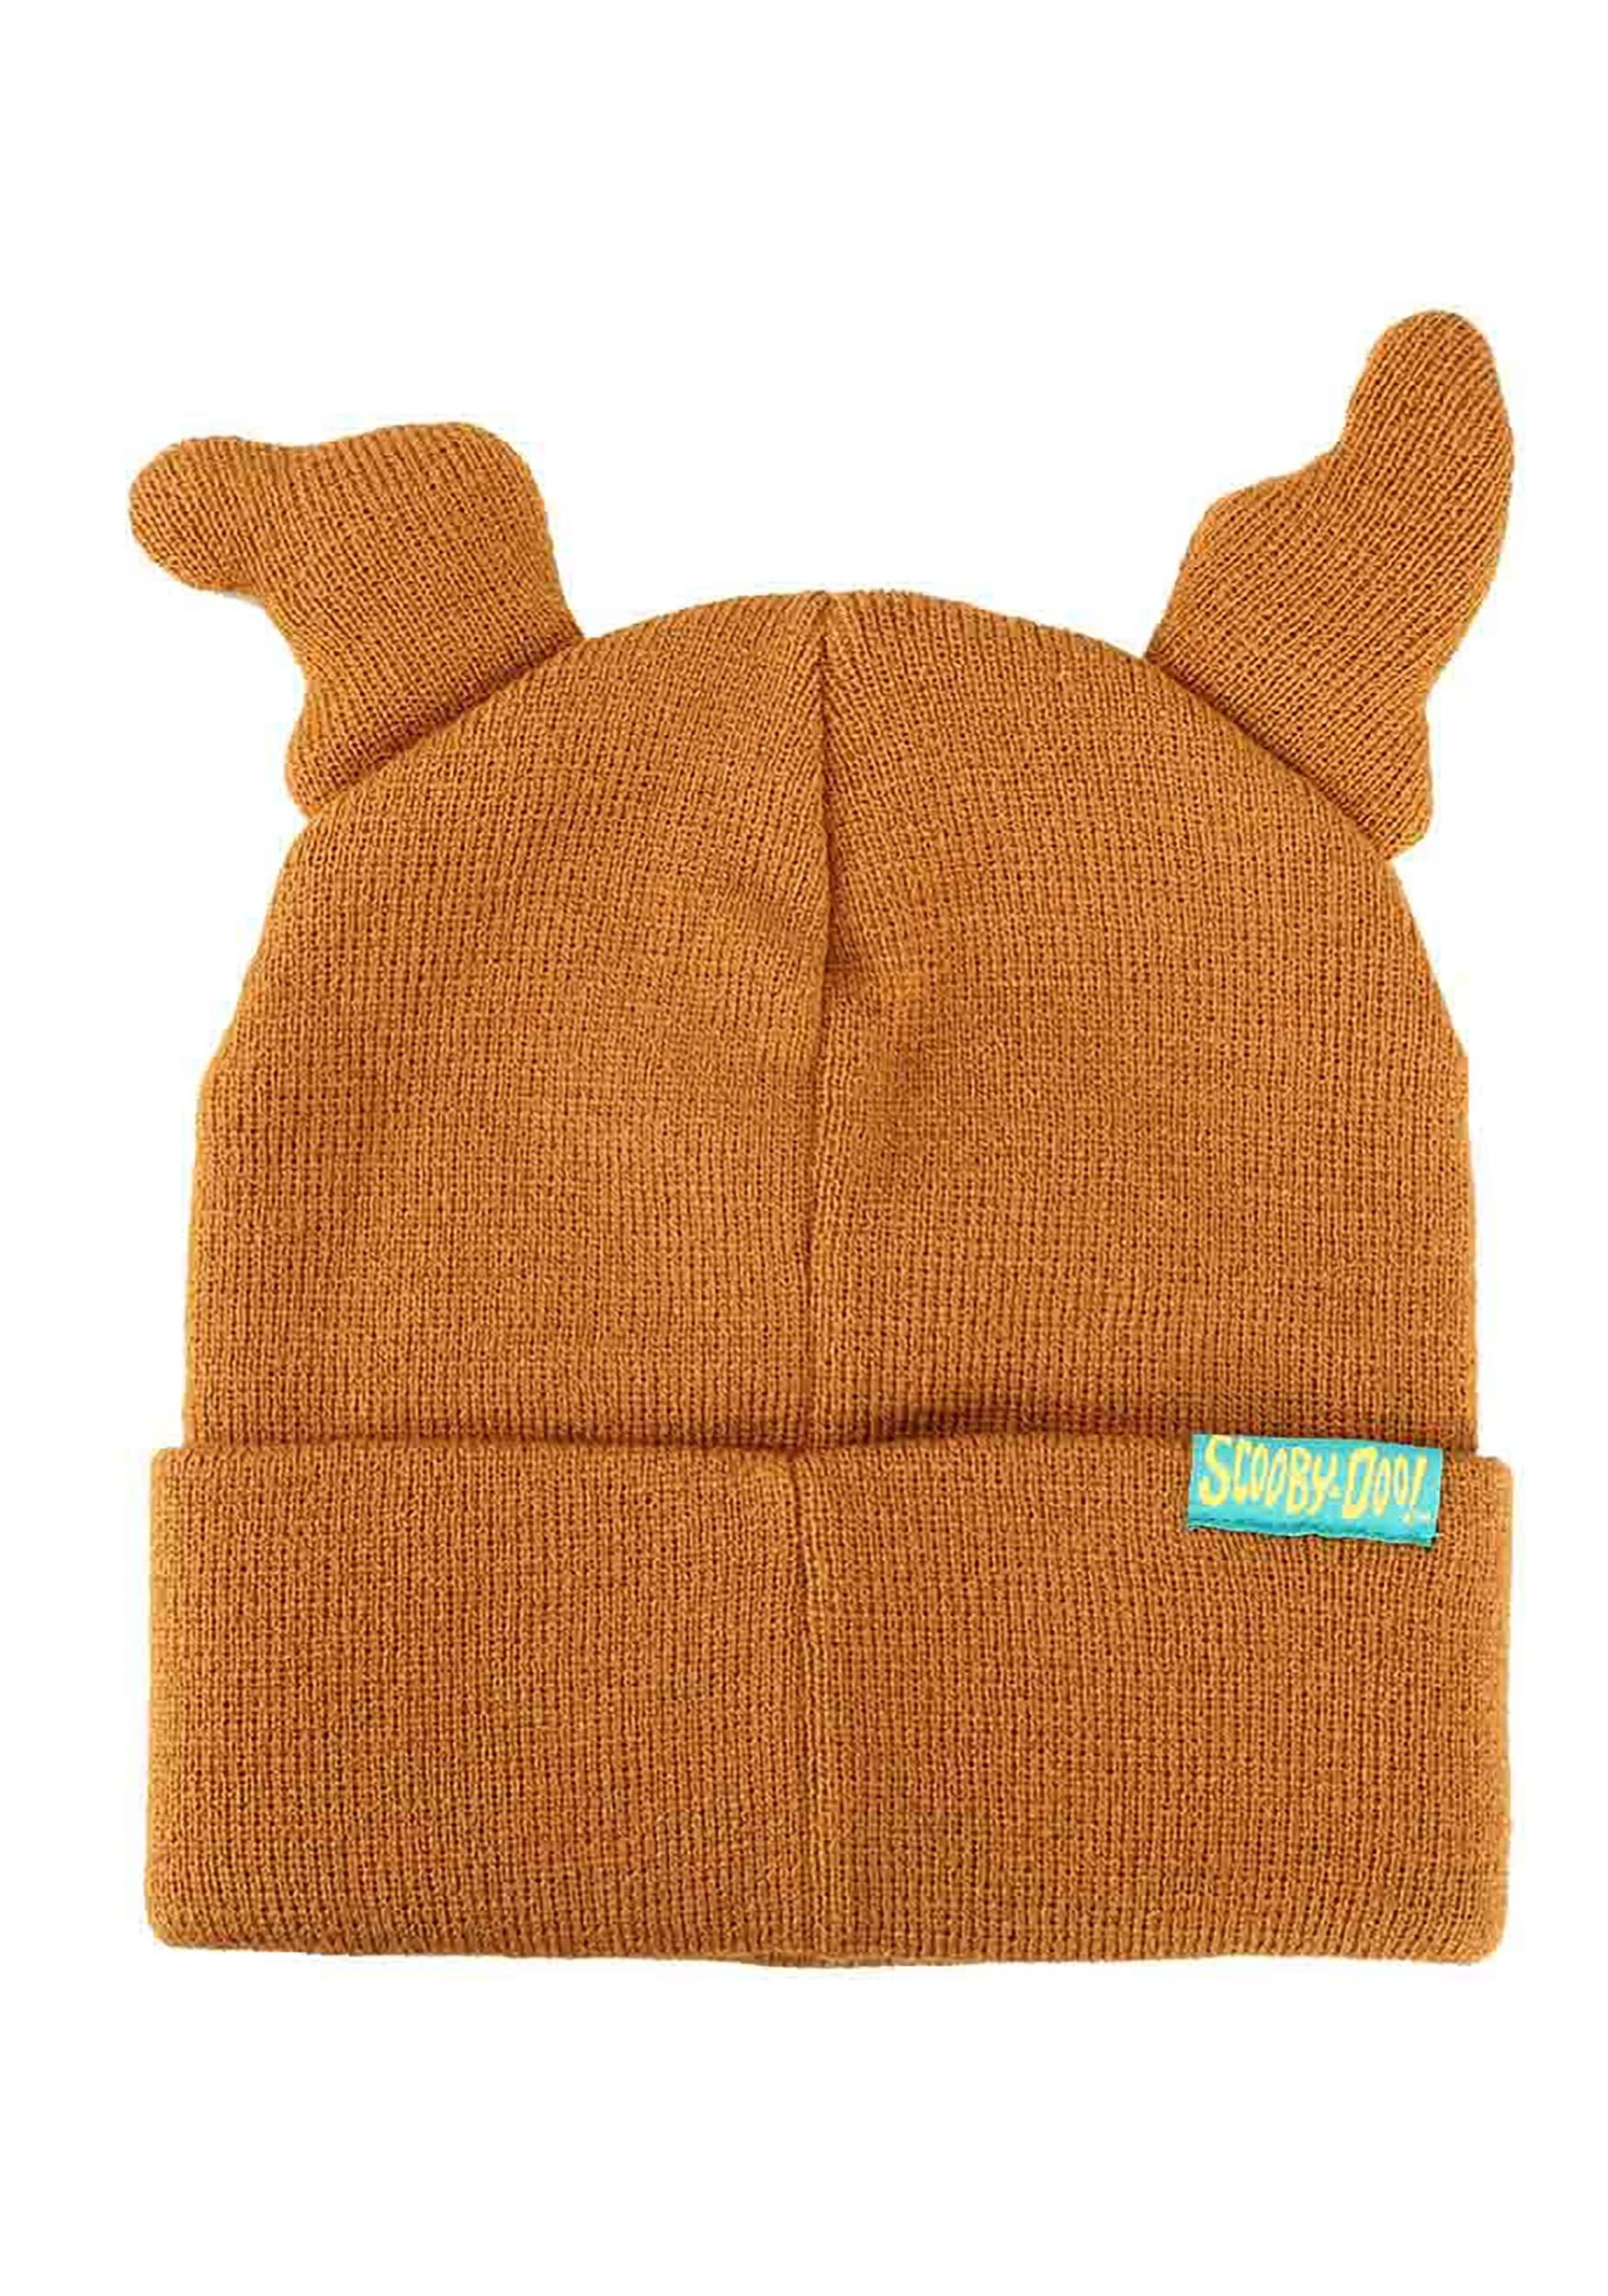 3D Scooby Doo Plush Ears Embroidered Beanie , Scooby Doo Gifts